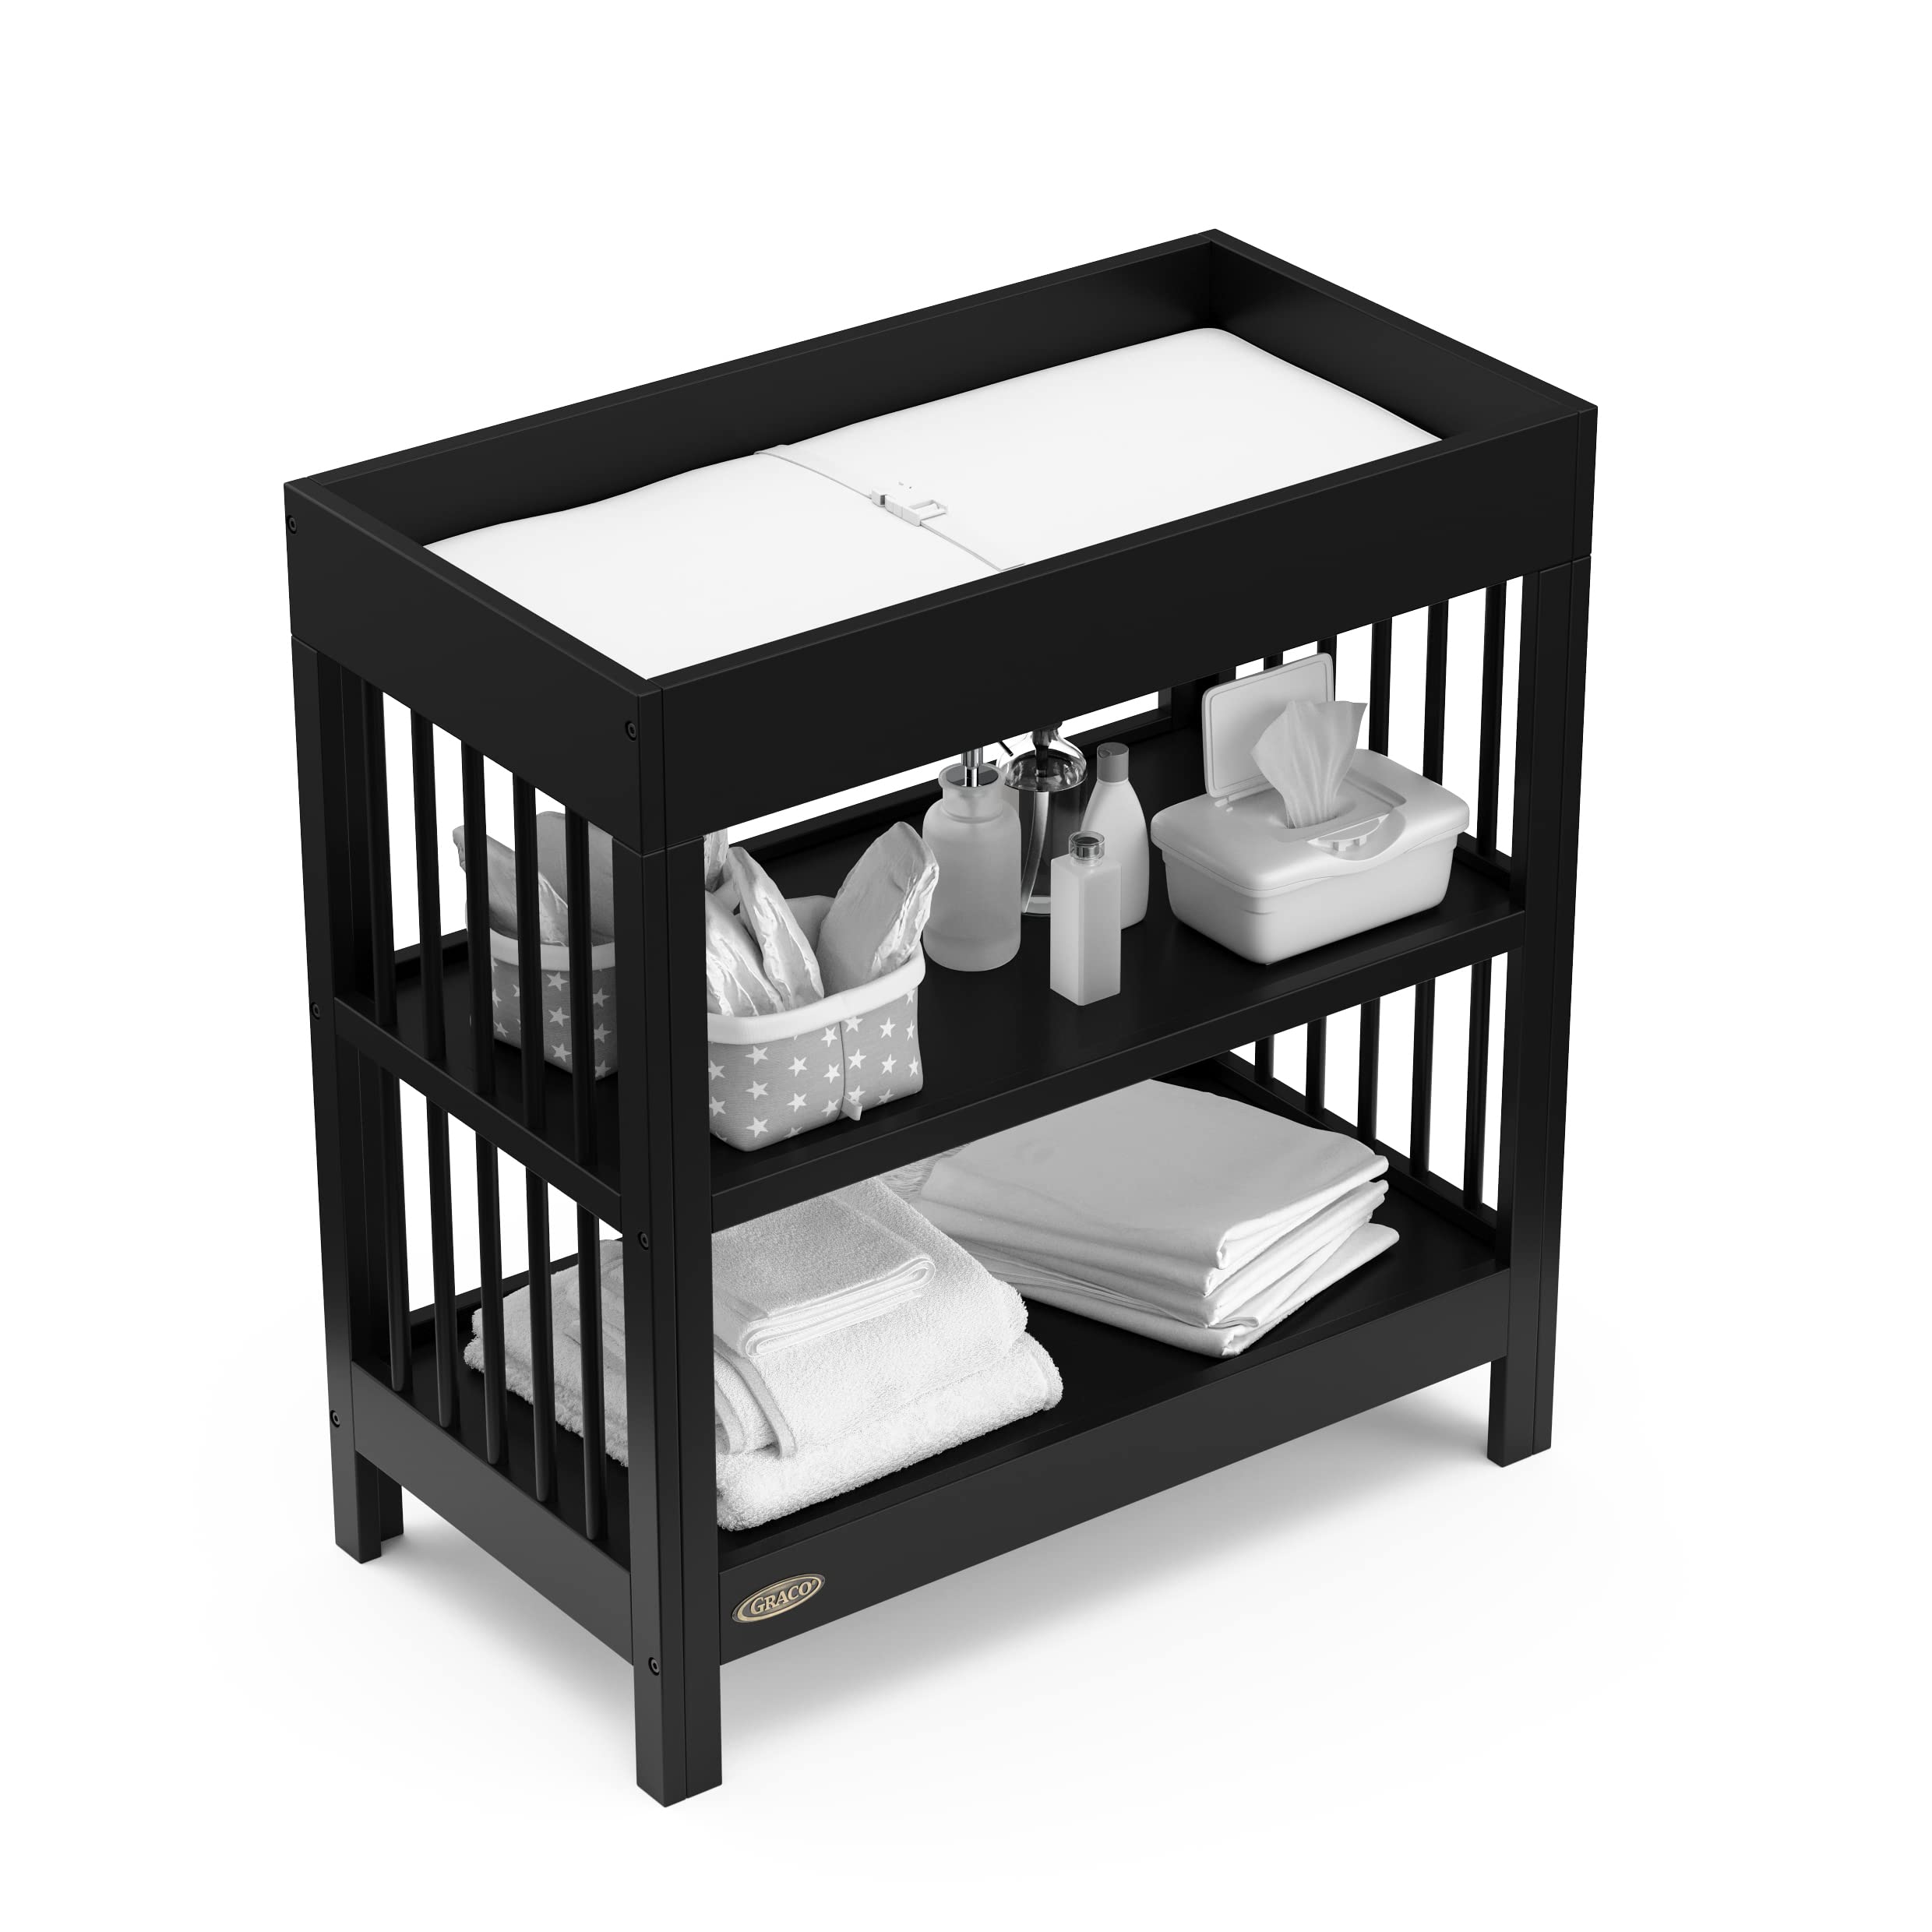 Graco Teddi Changing Table with Water-Resistant Changing Pad (Black) - 2 Open Shelves, Includes Bonus Water-Resistant Changing Pad with Safety Strap